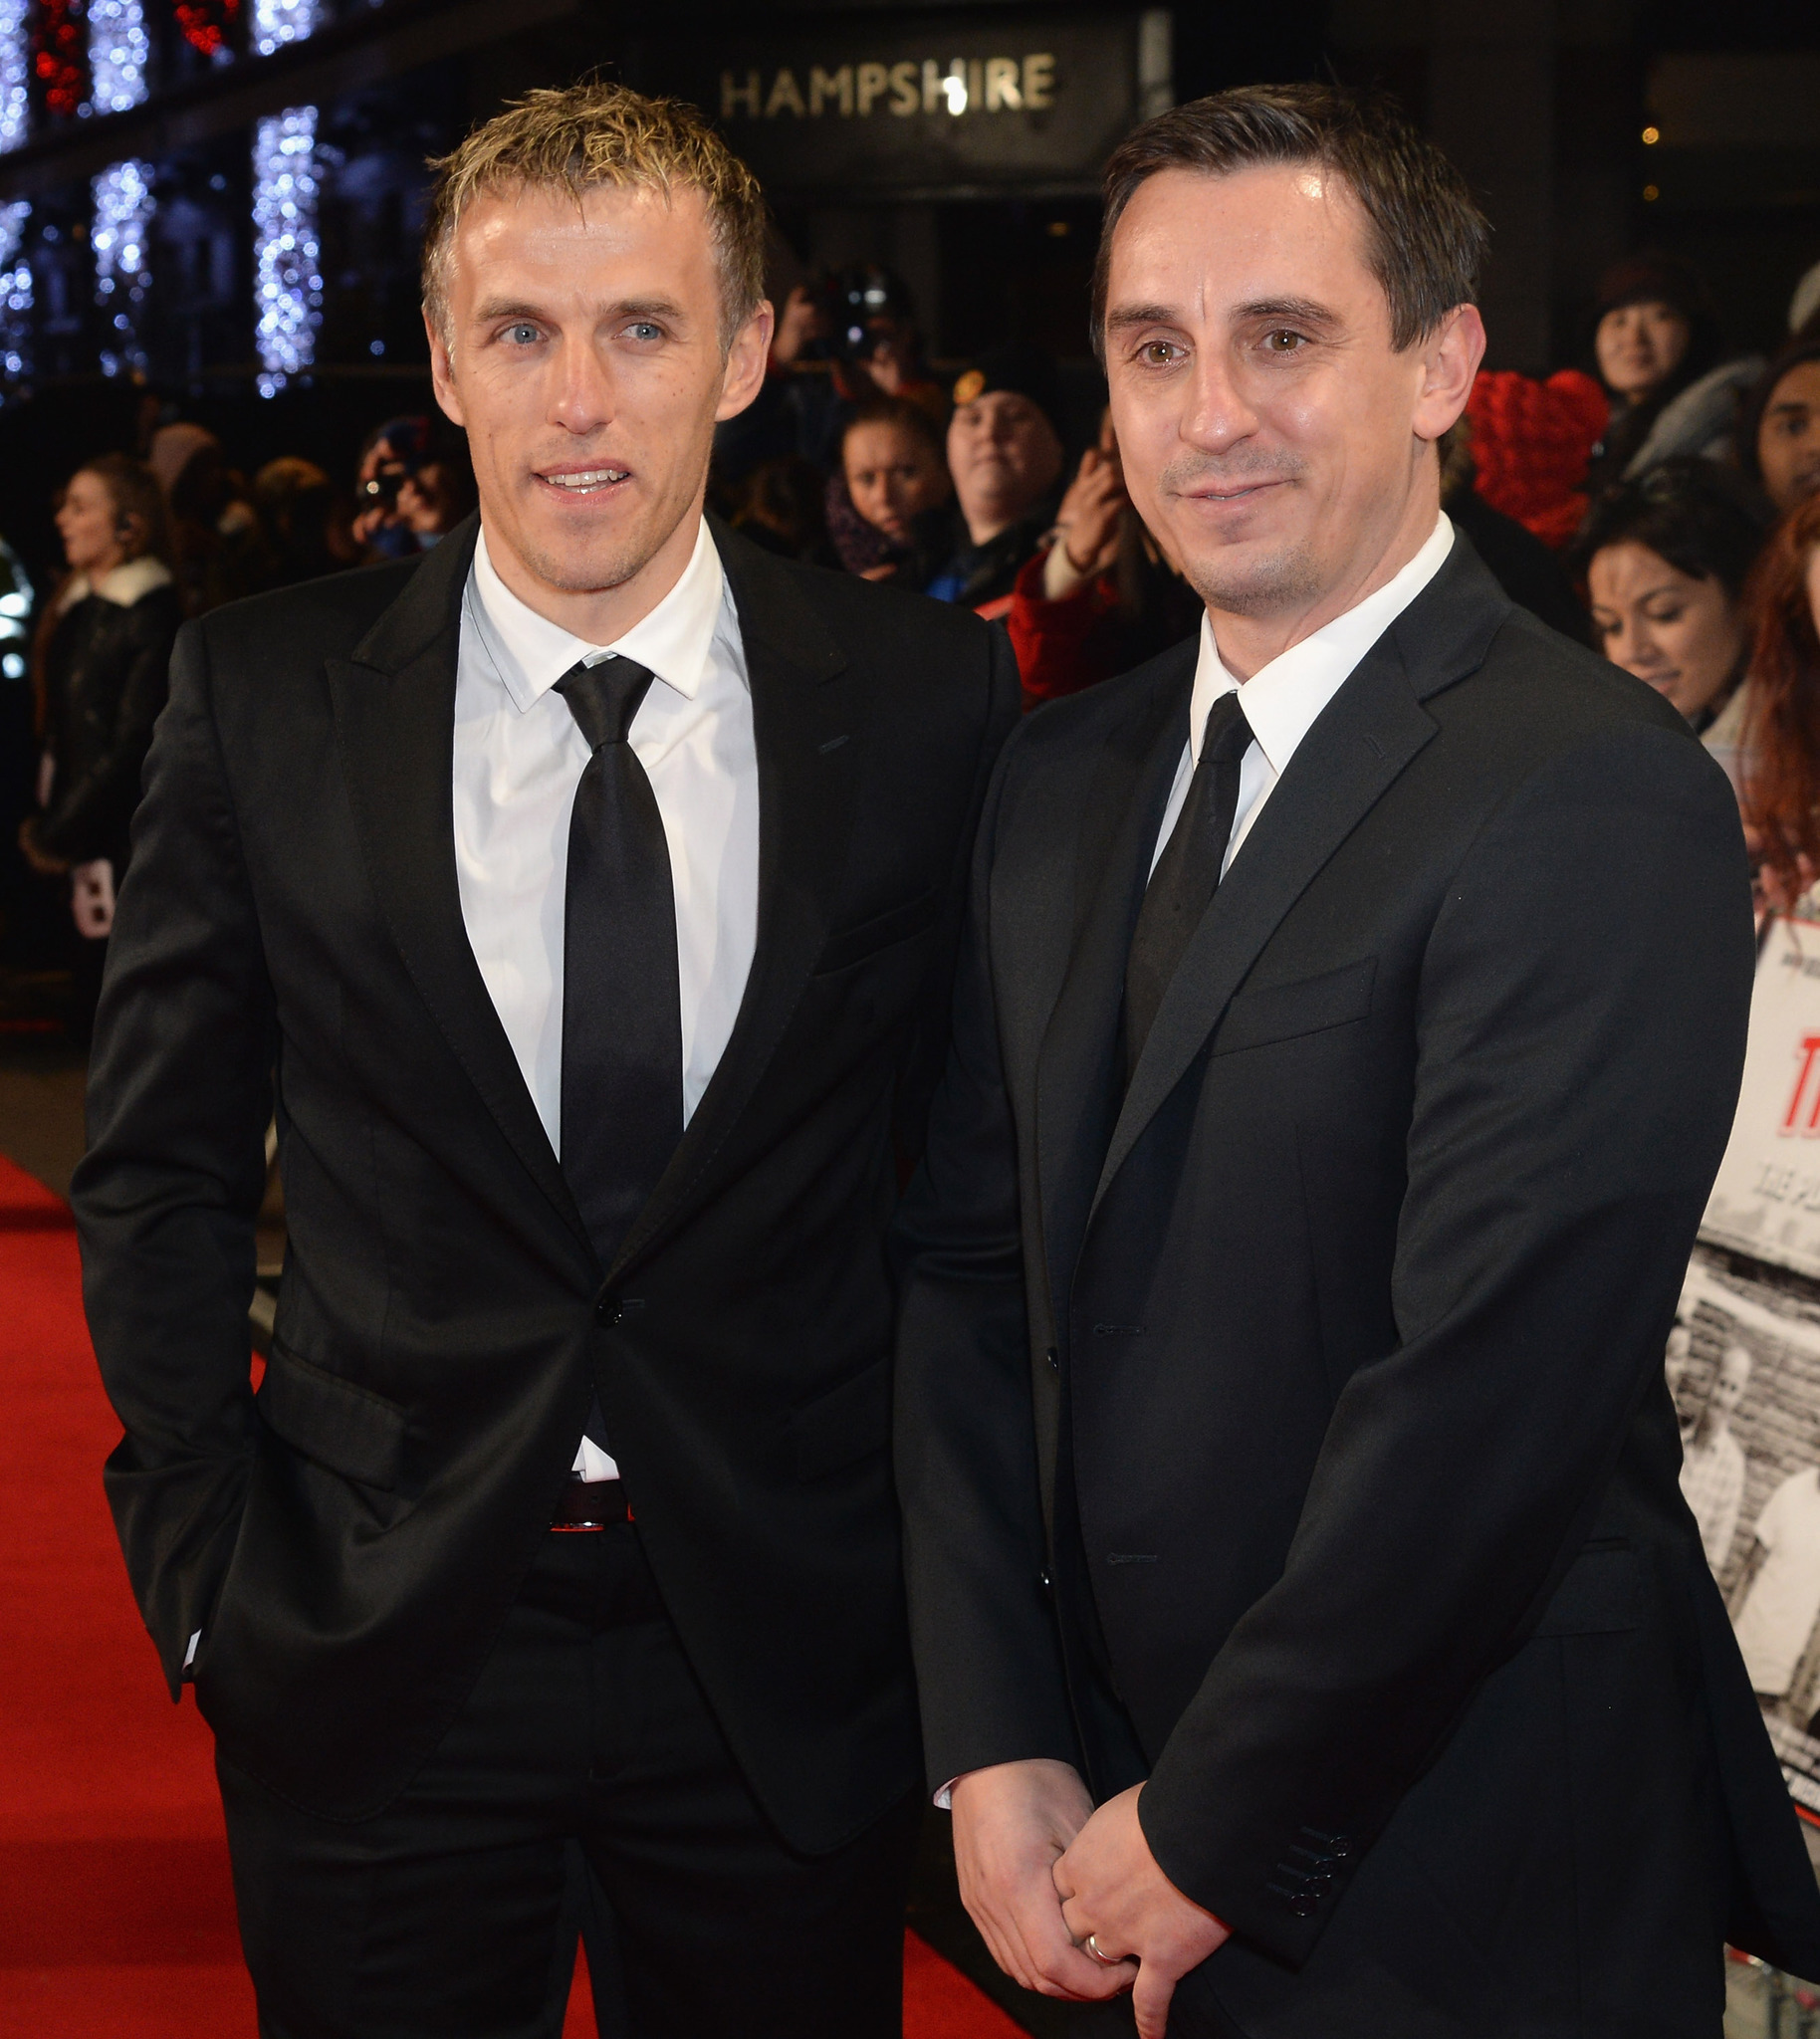 Gary Neville and Phil Neville at event of The Class of 92 (2013)